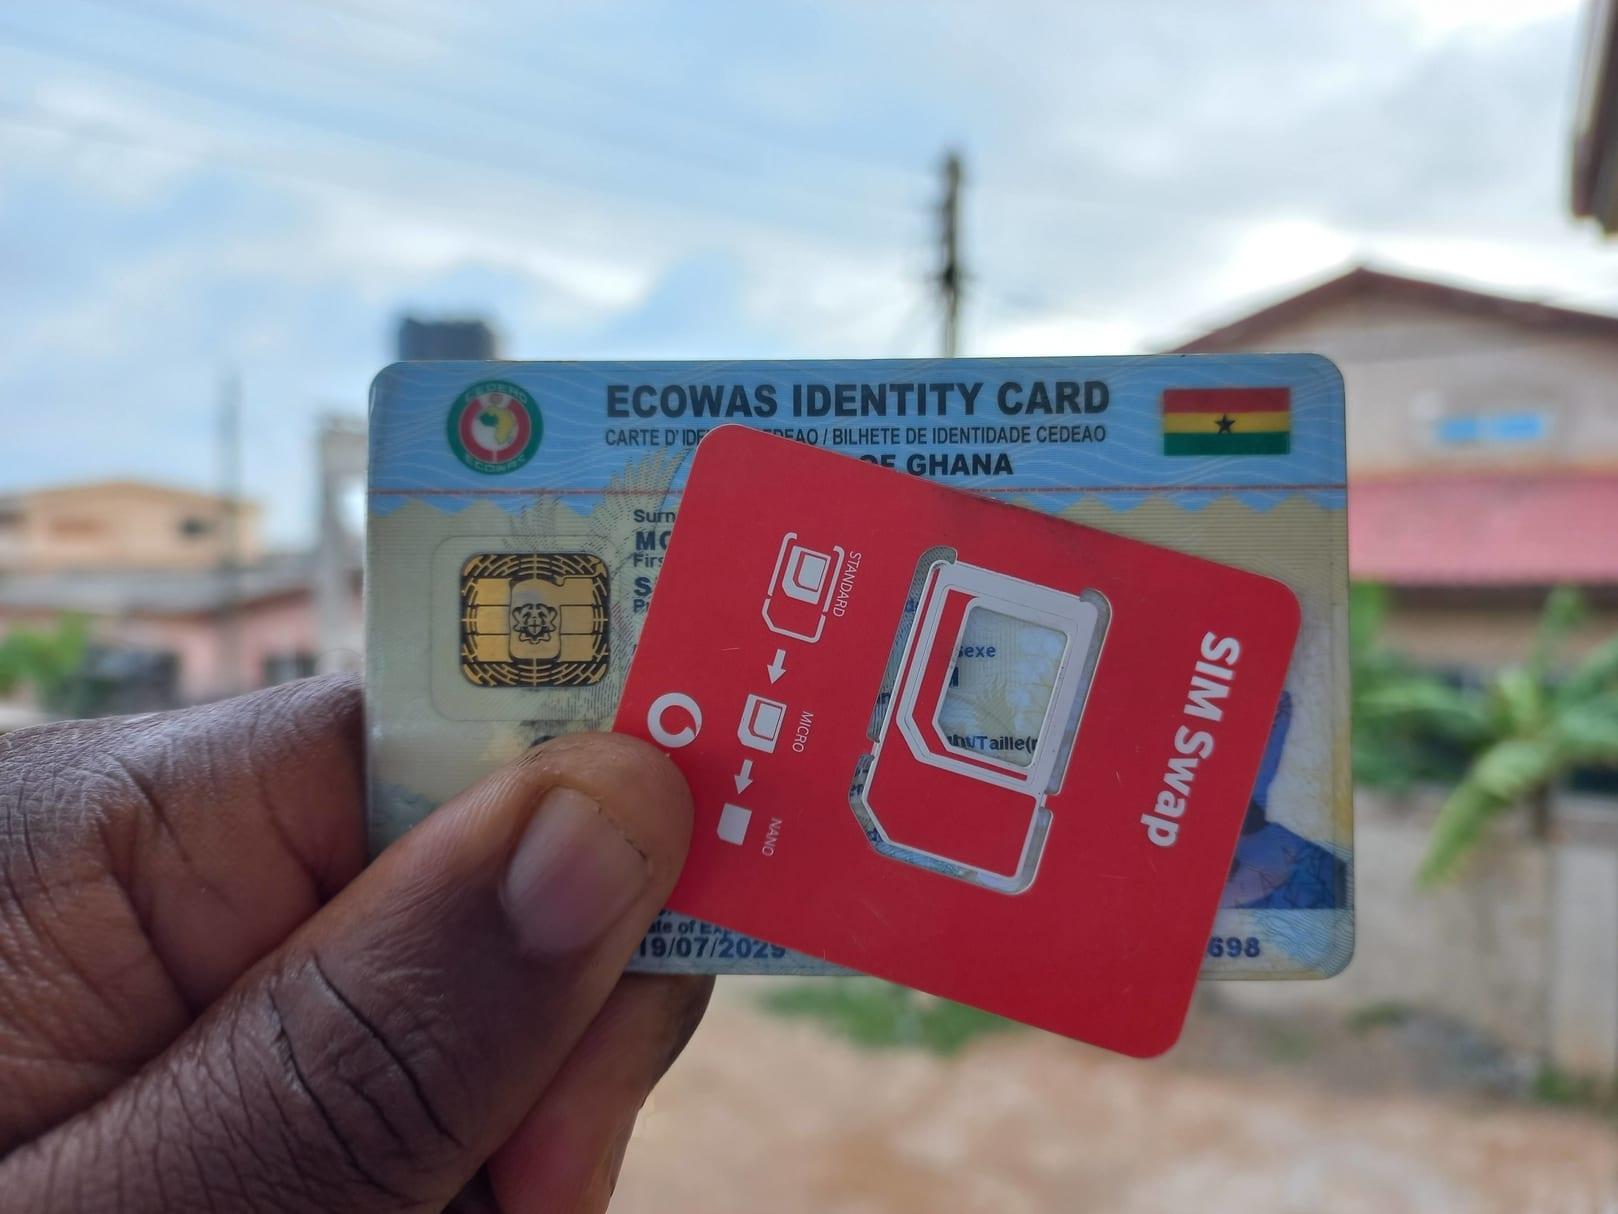 You can now self register your SIM card with GH SIM SELF REG